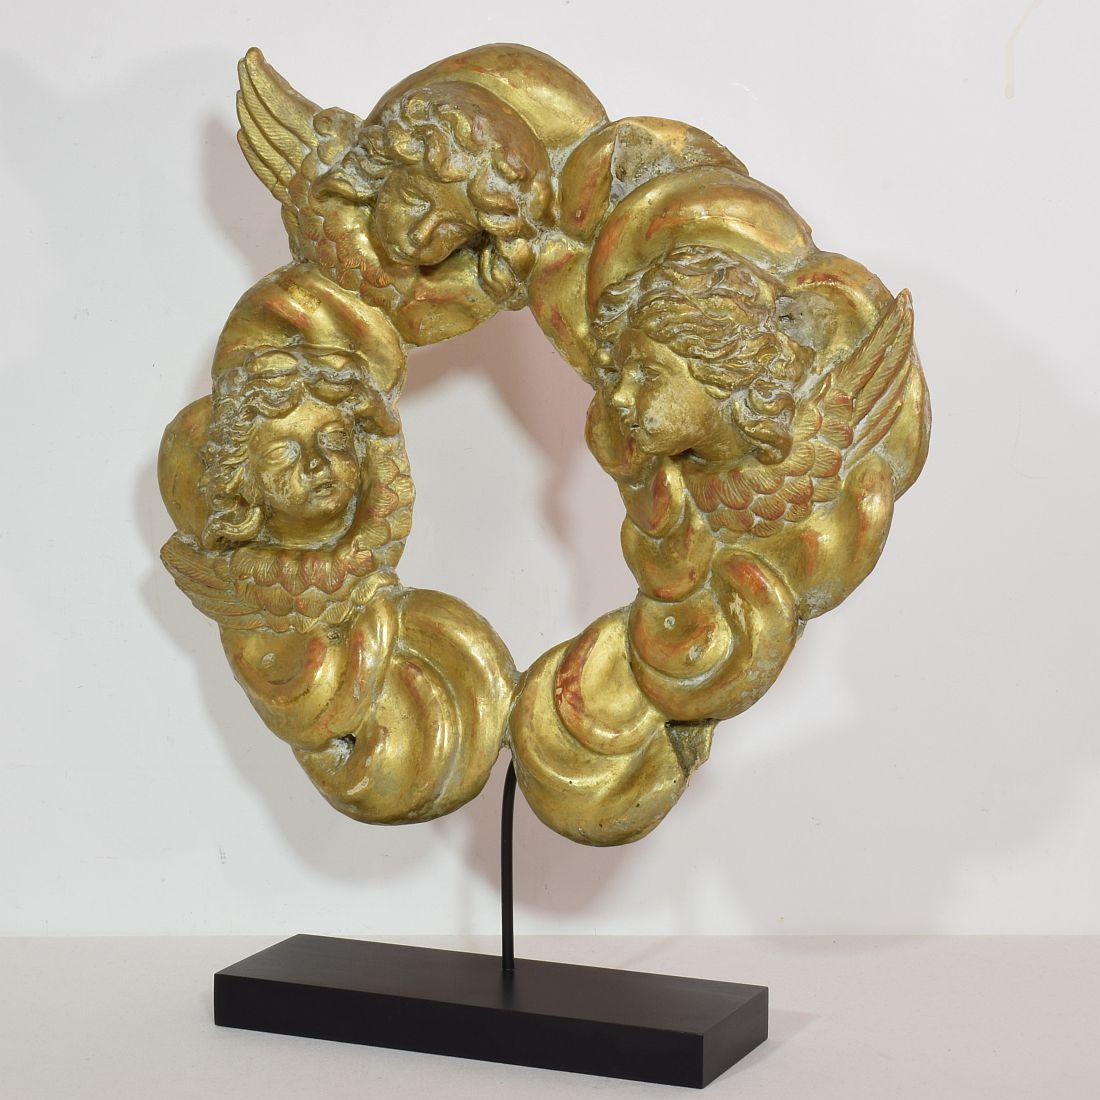 Wonderful hand carved wreath of baroque clouds with 3 winged angel heads.
Italy, circa 1750. Gilt and gilt paint visible
Weathered and small losses. Now placed on a pedestal but can also be hanged at a wall.
Measurement here below inclusive the